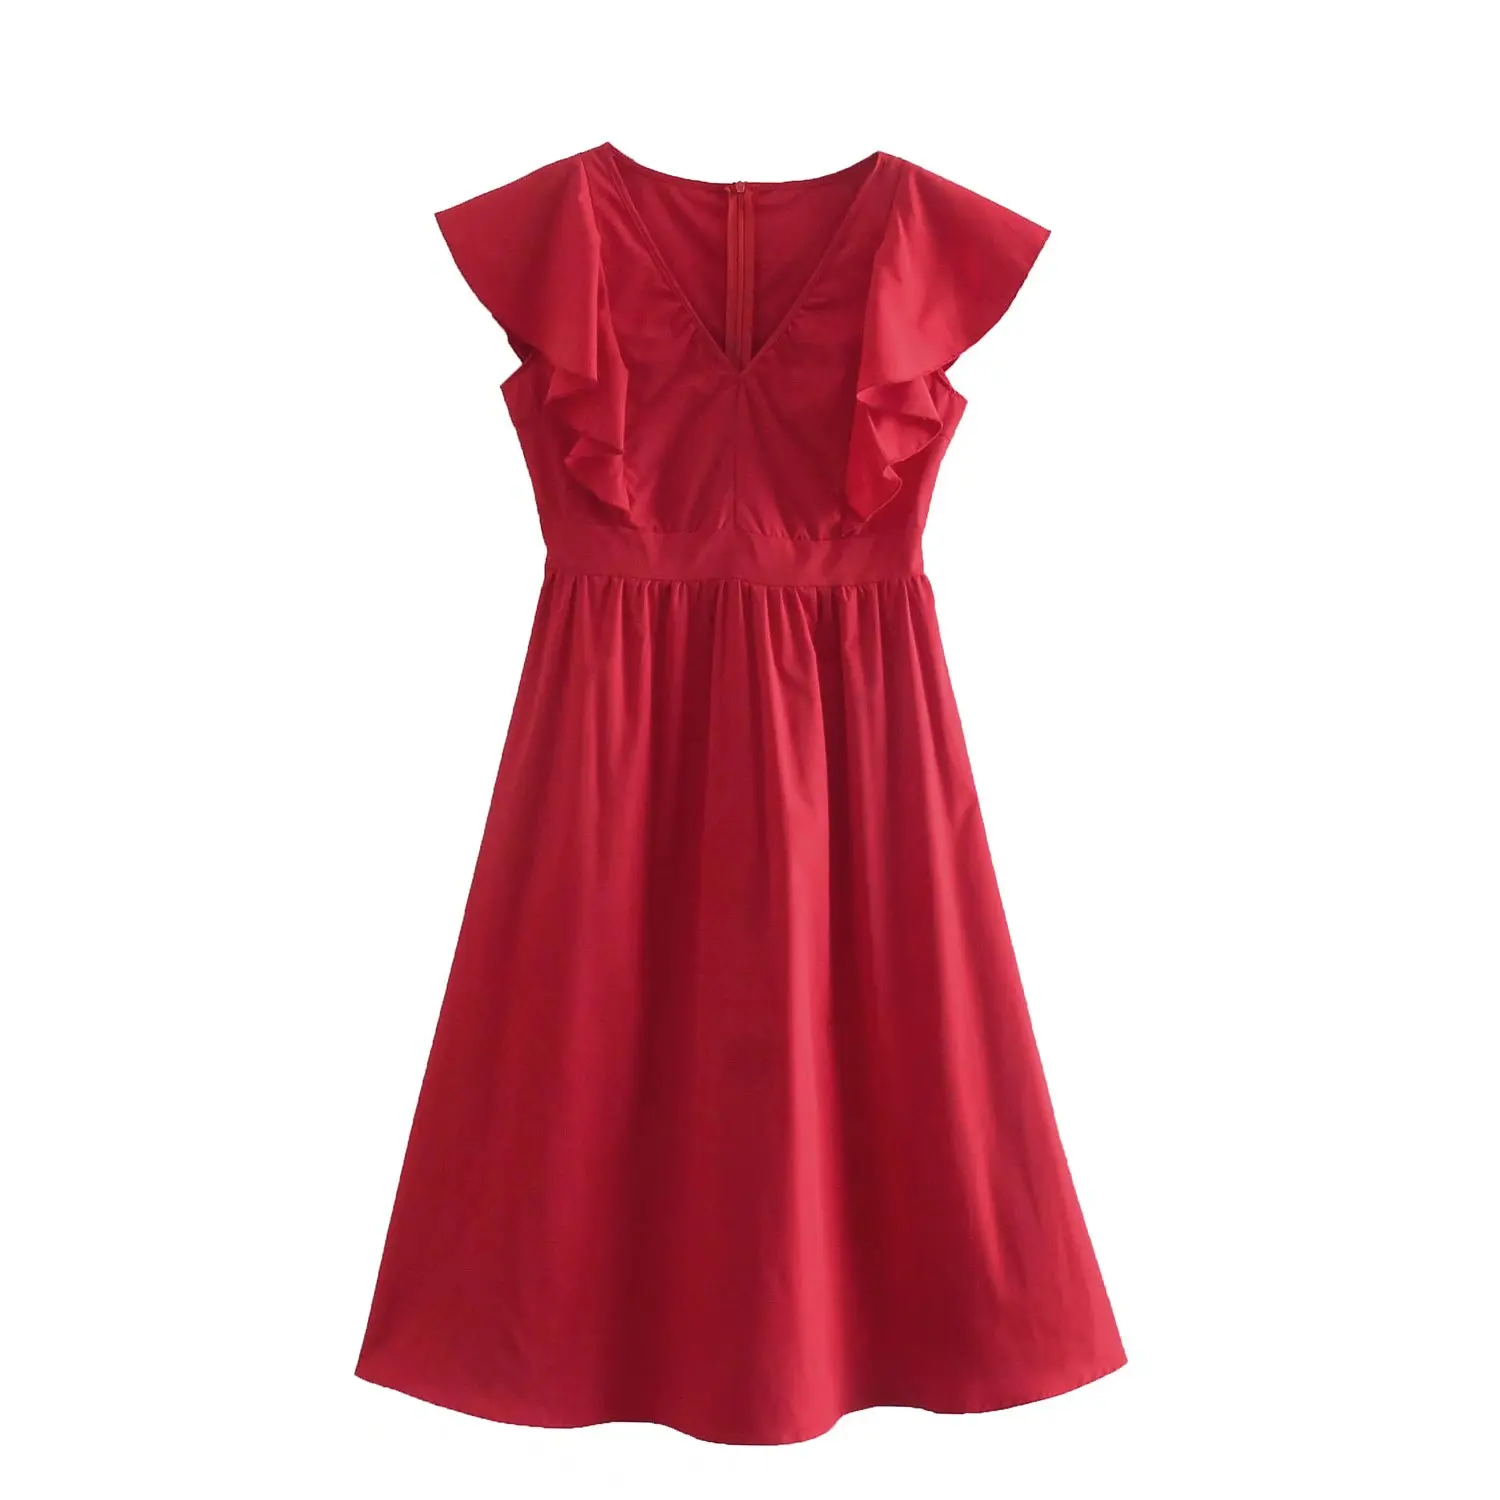 

Women Elegant Red Dress with Ruffled Short Sleeves V-neckline with Pleated Detail Chic Lady Woman Vintage Midi Dresses